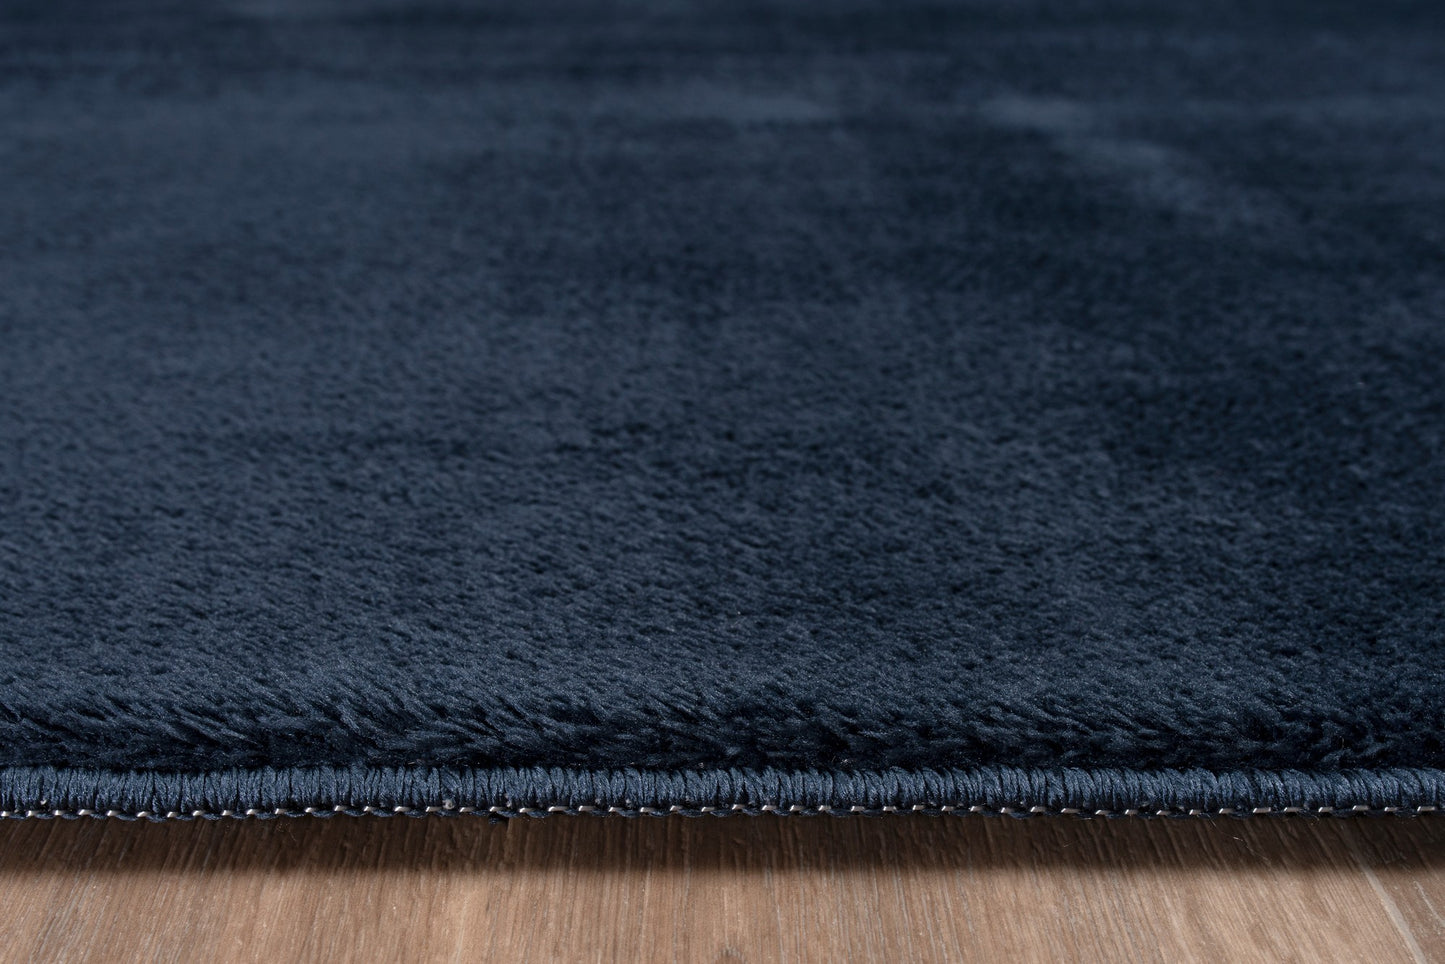 navy blue fluffy soft machine washable area rug for living room bedroom 2x8, 3x10, 2x10 ft Long Runner Rug, Hallway, Balcony, Entry Way, Kitchen, Stairs